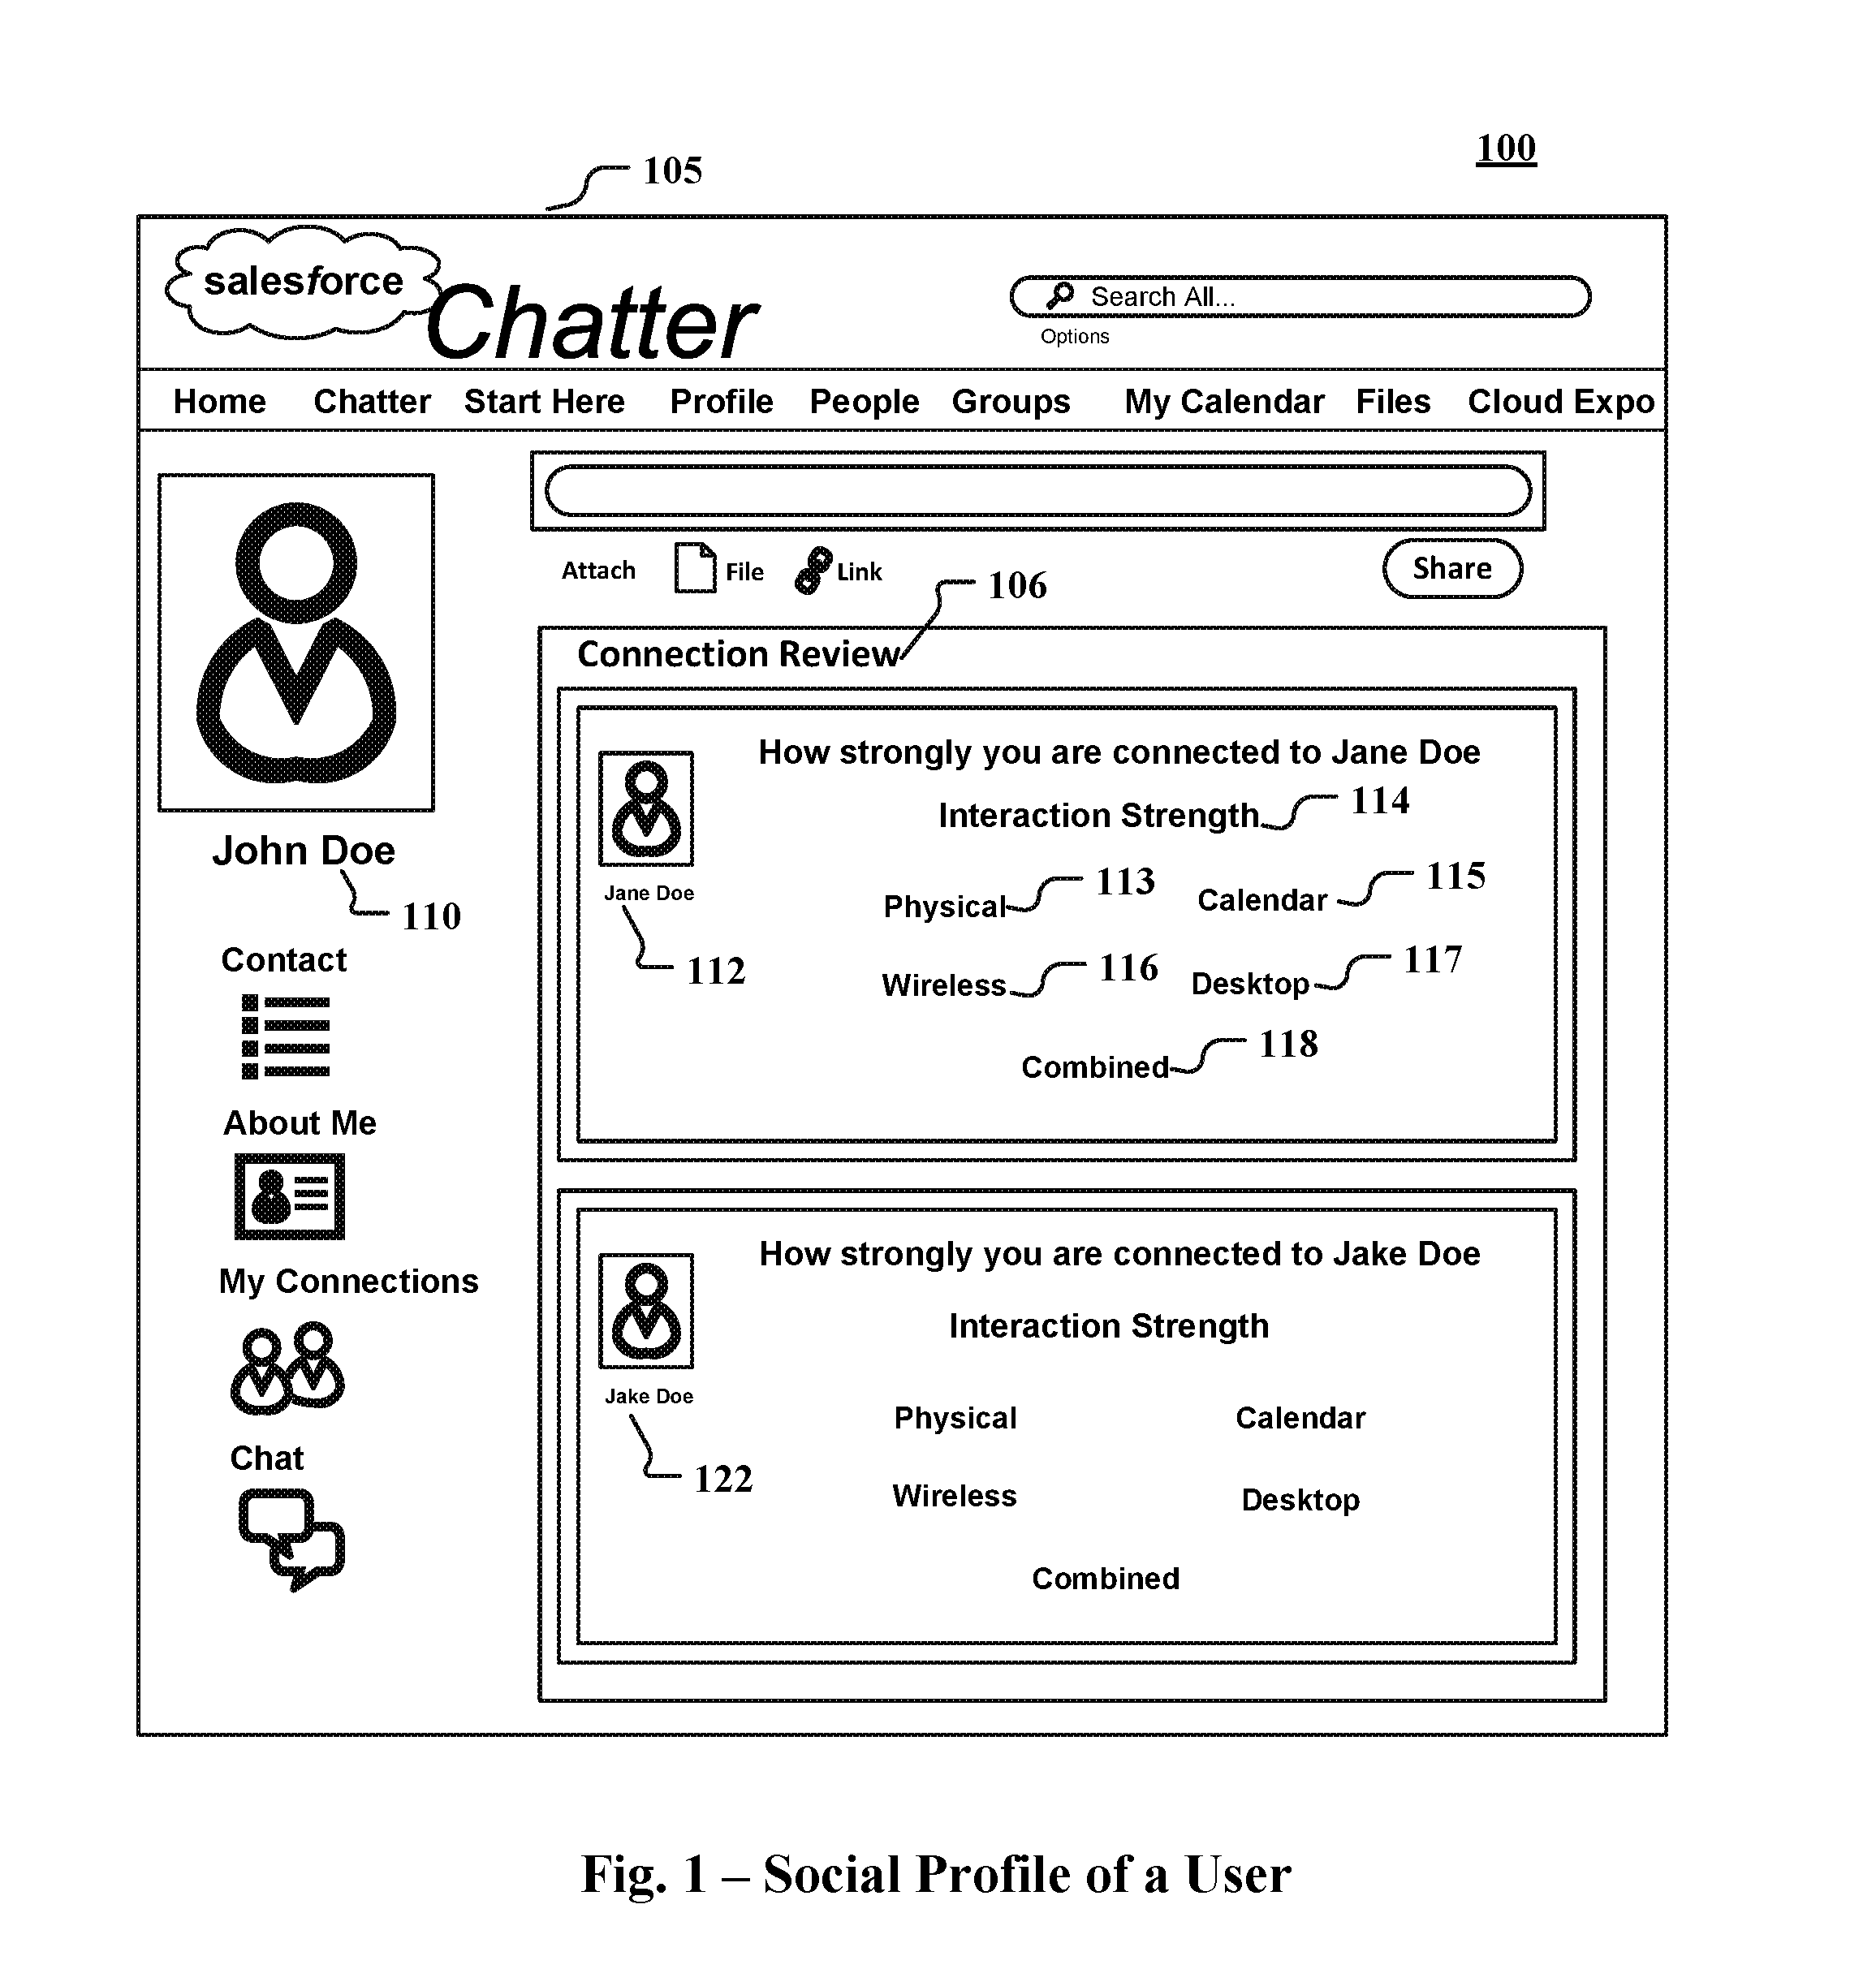 Displaying aggregated connection data using a database system